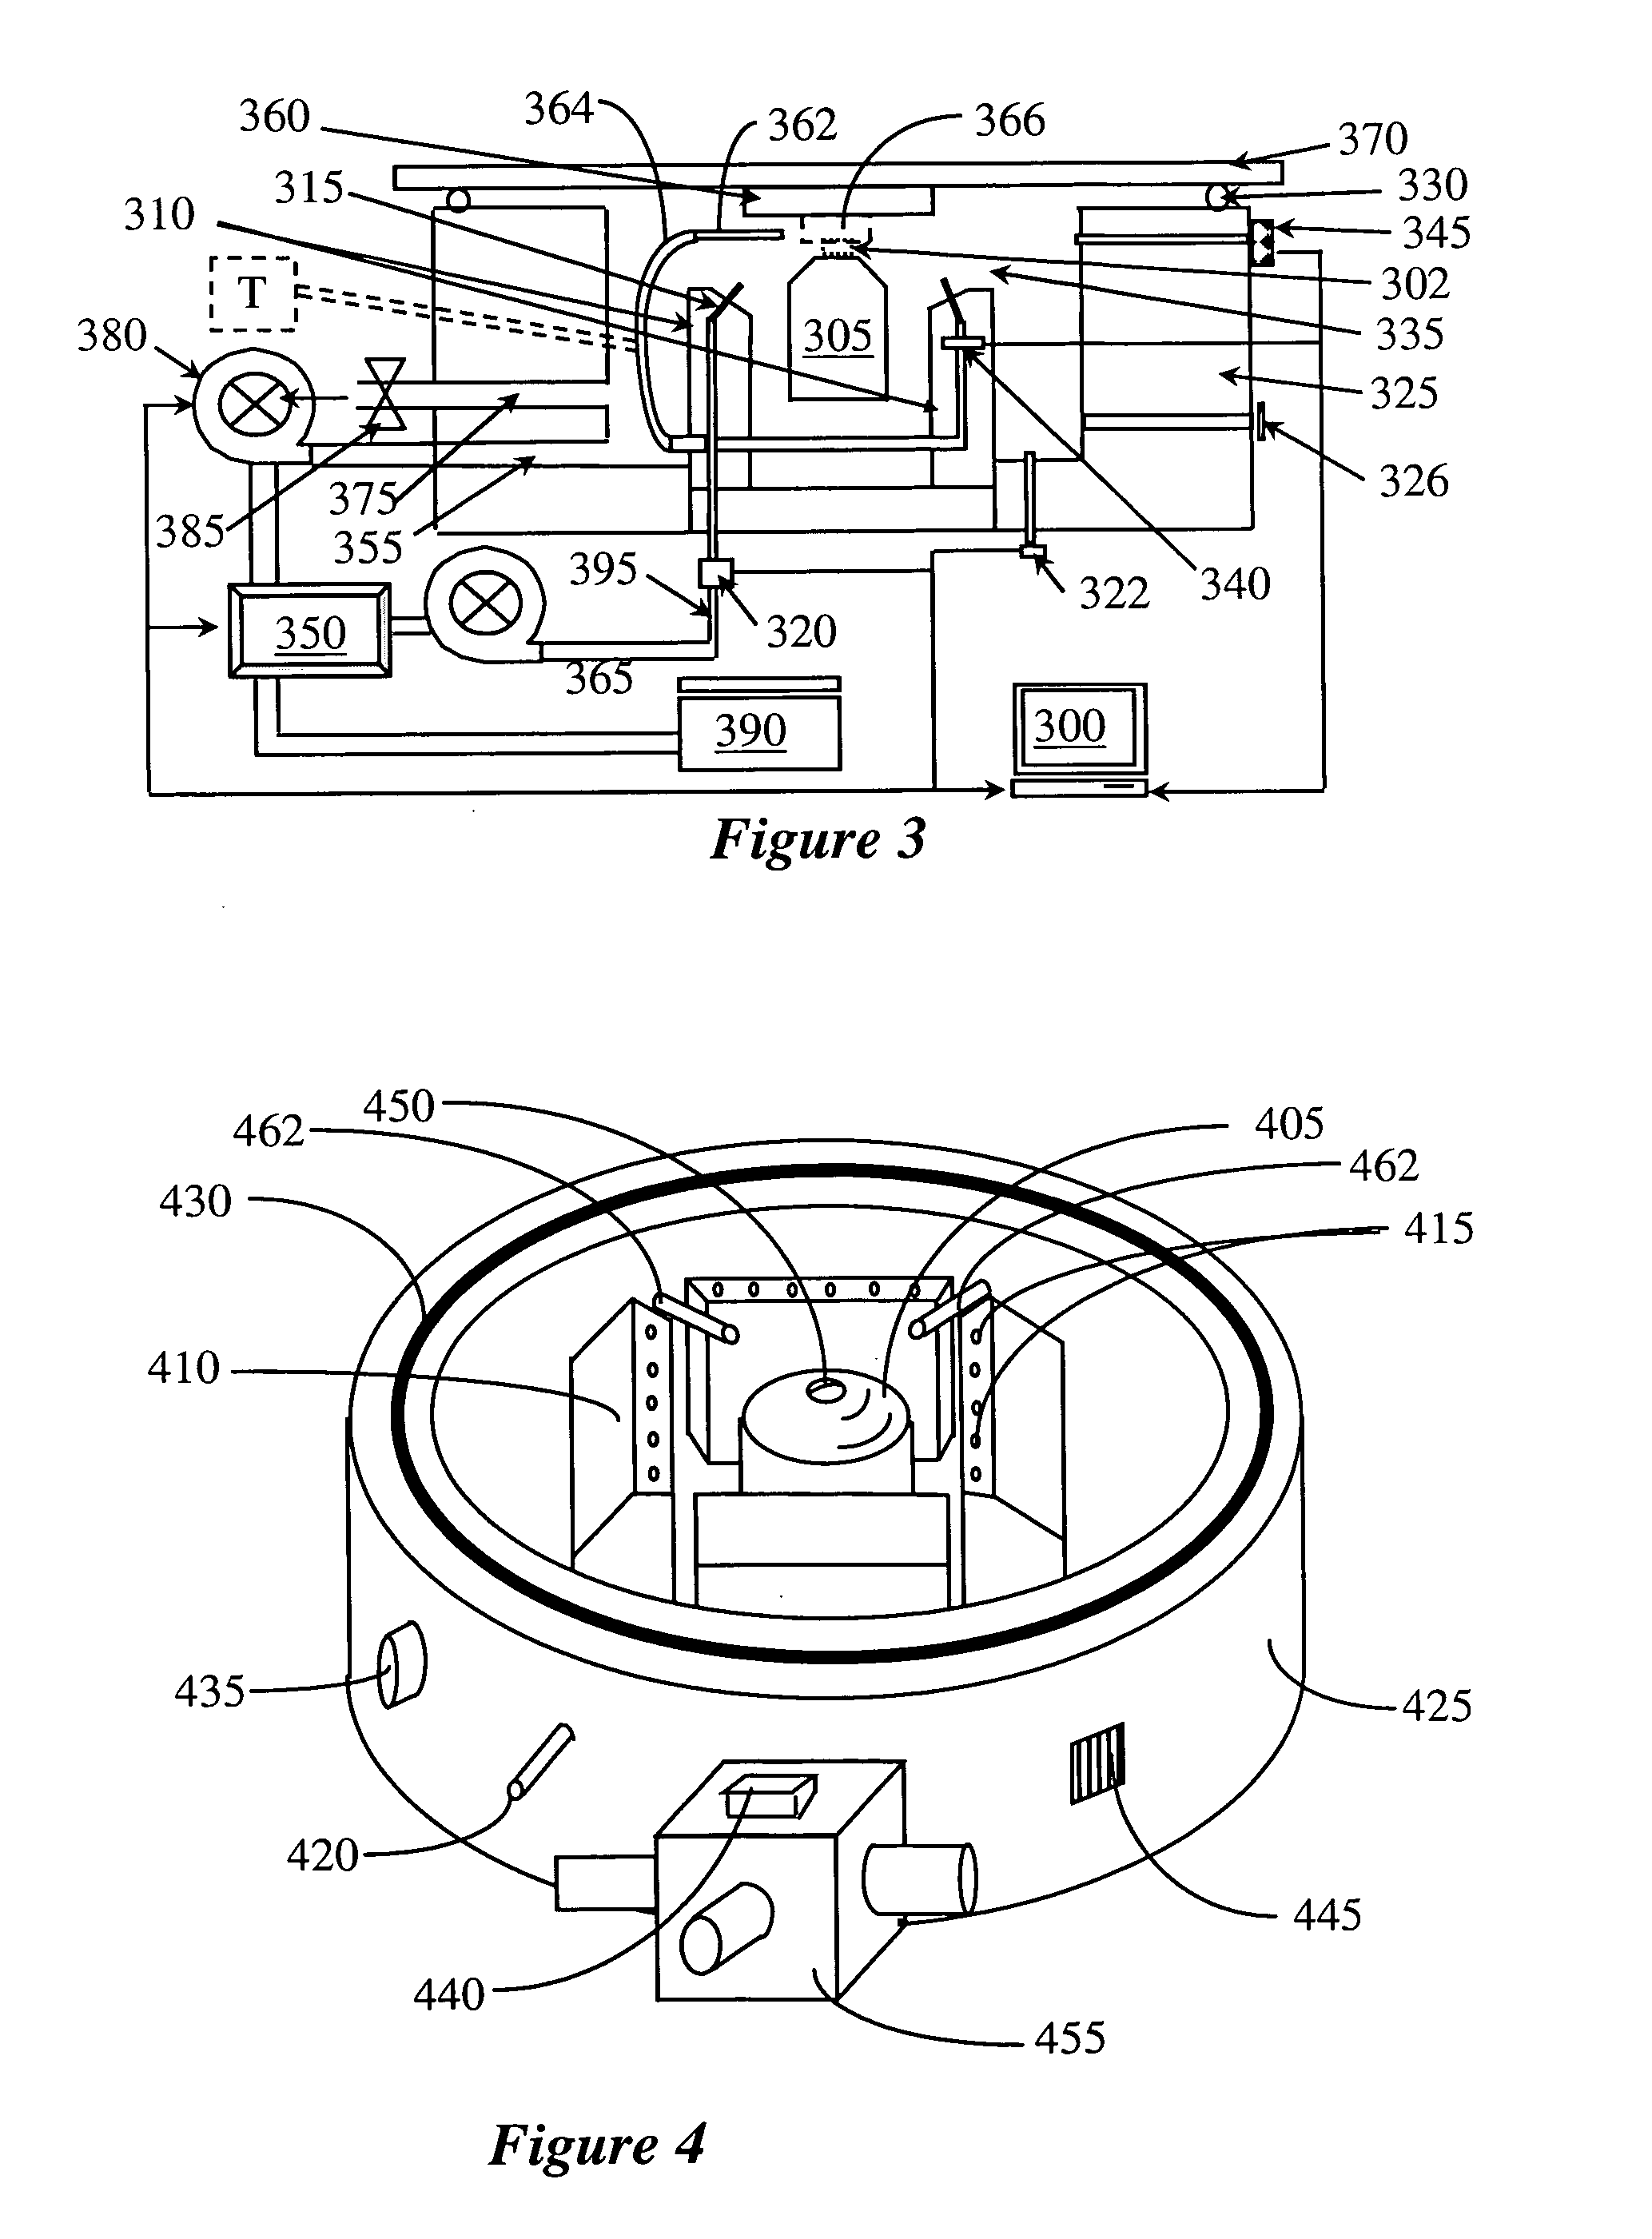 System and method for thermal management and gradient reduction